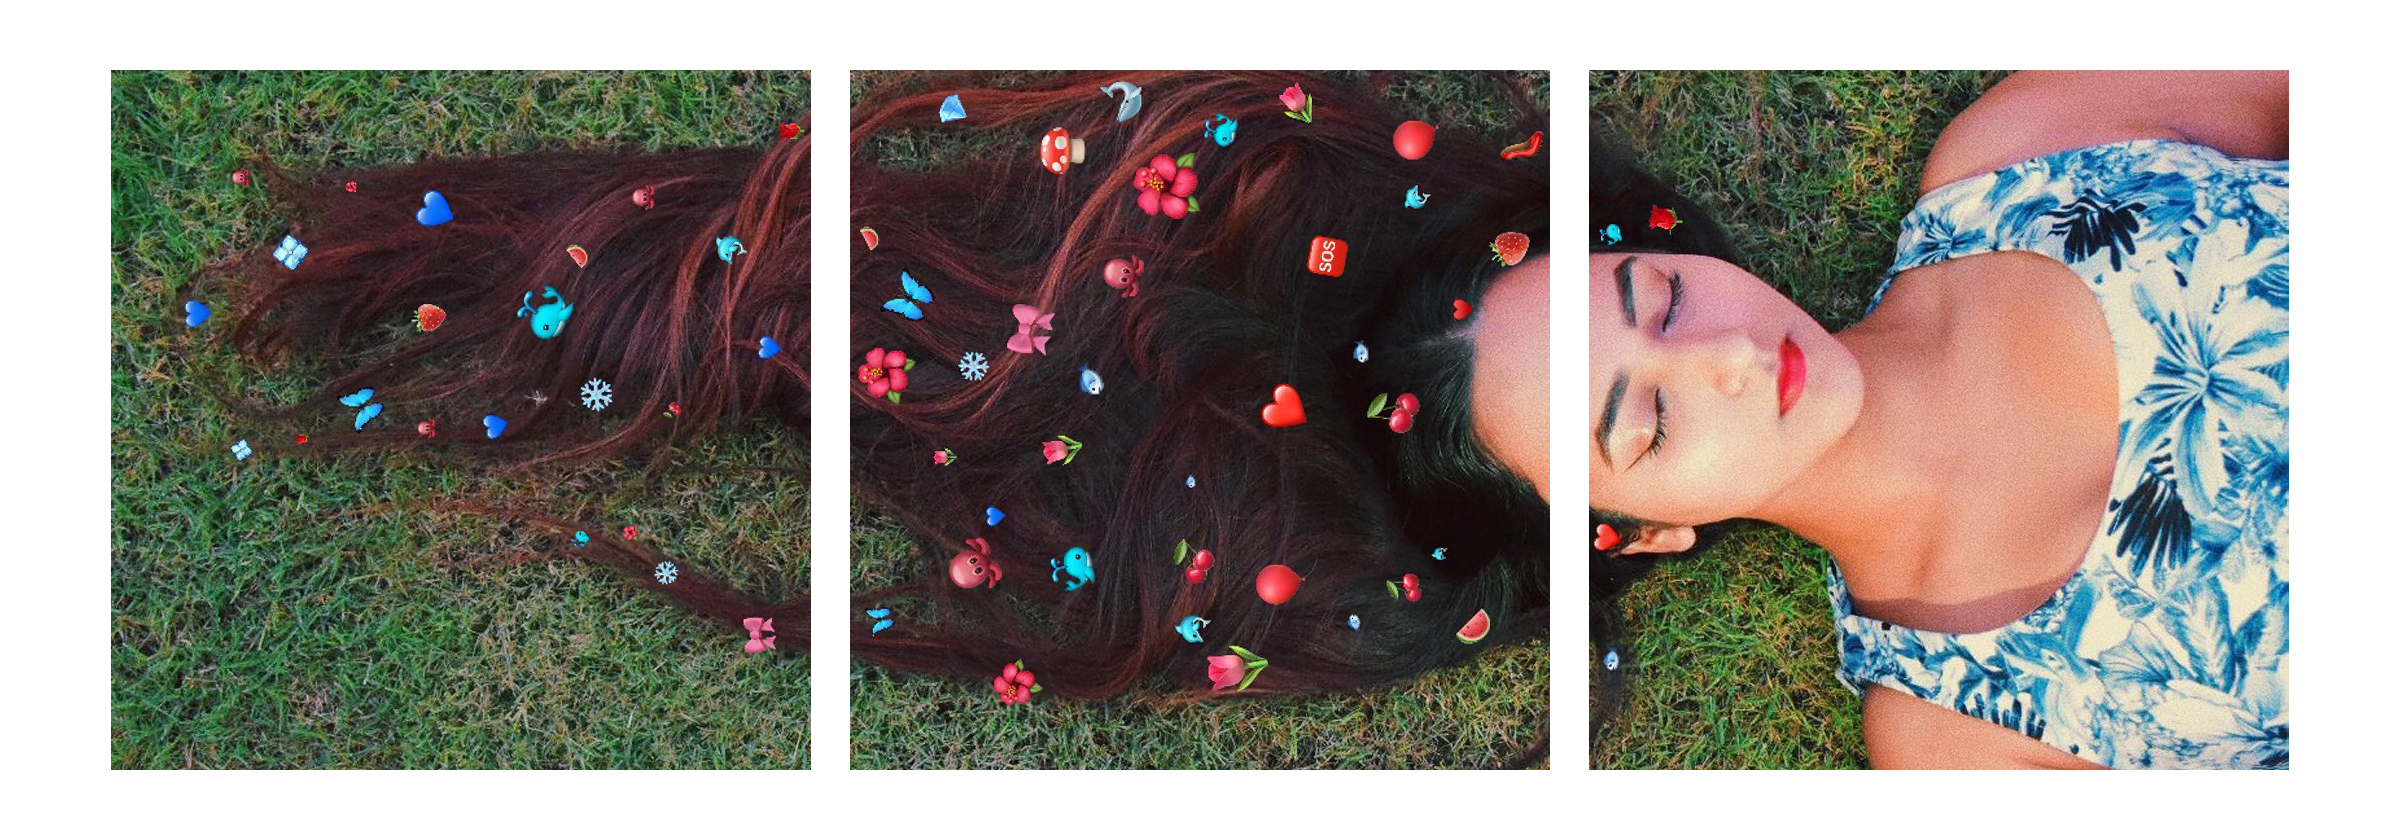 Girl laying on grass with flowers in her hair